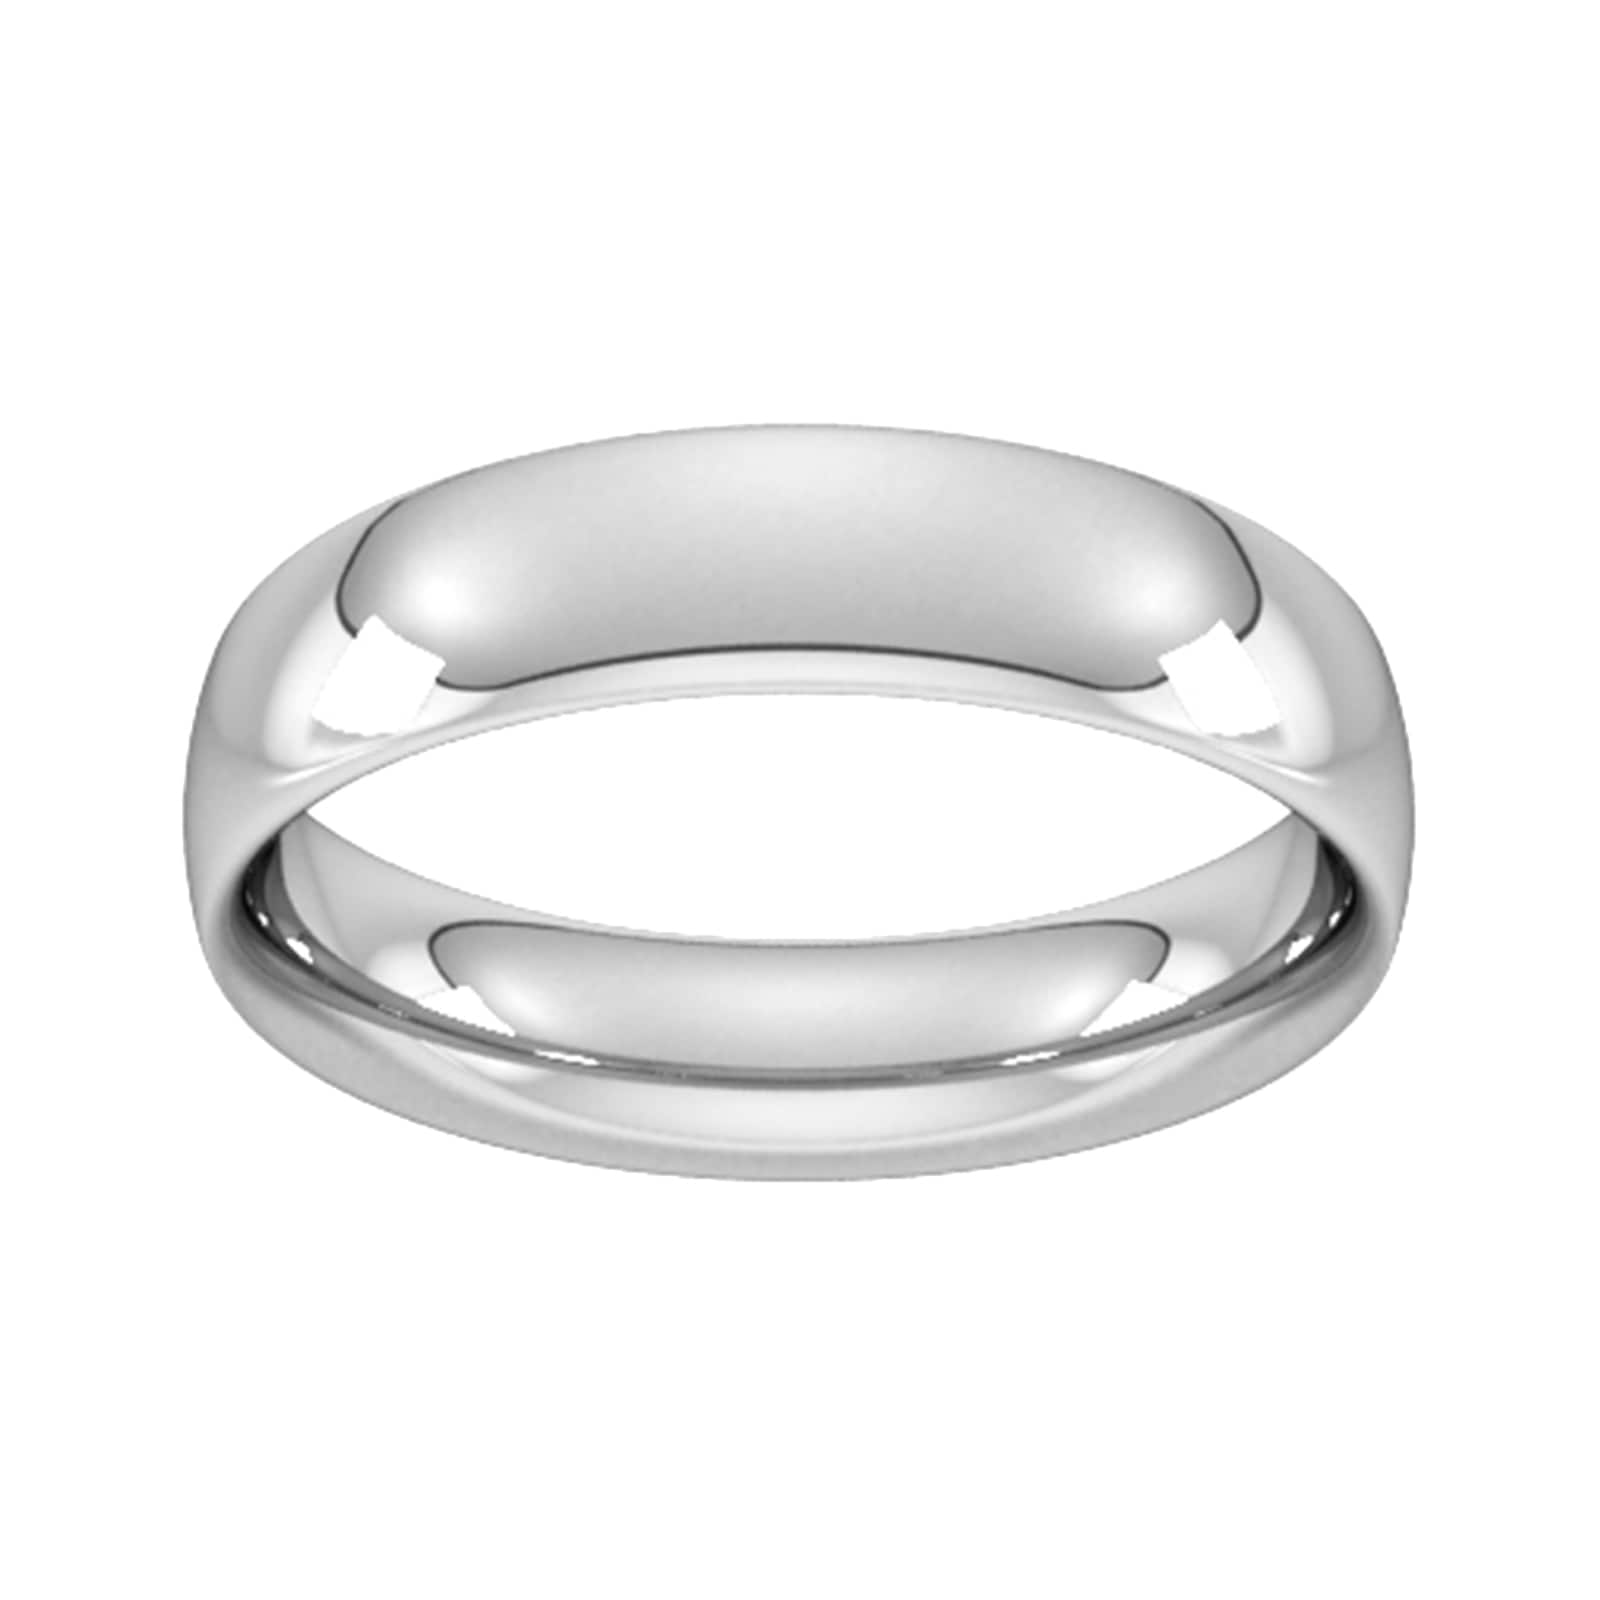 5mm Traditional Court Heavy Wedding Ring In 950 Palladium - Ring Size Q